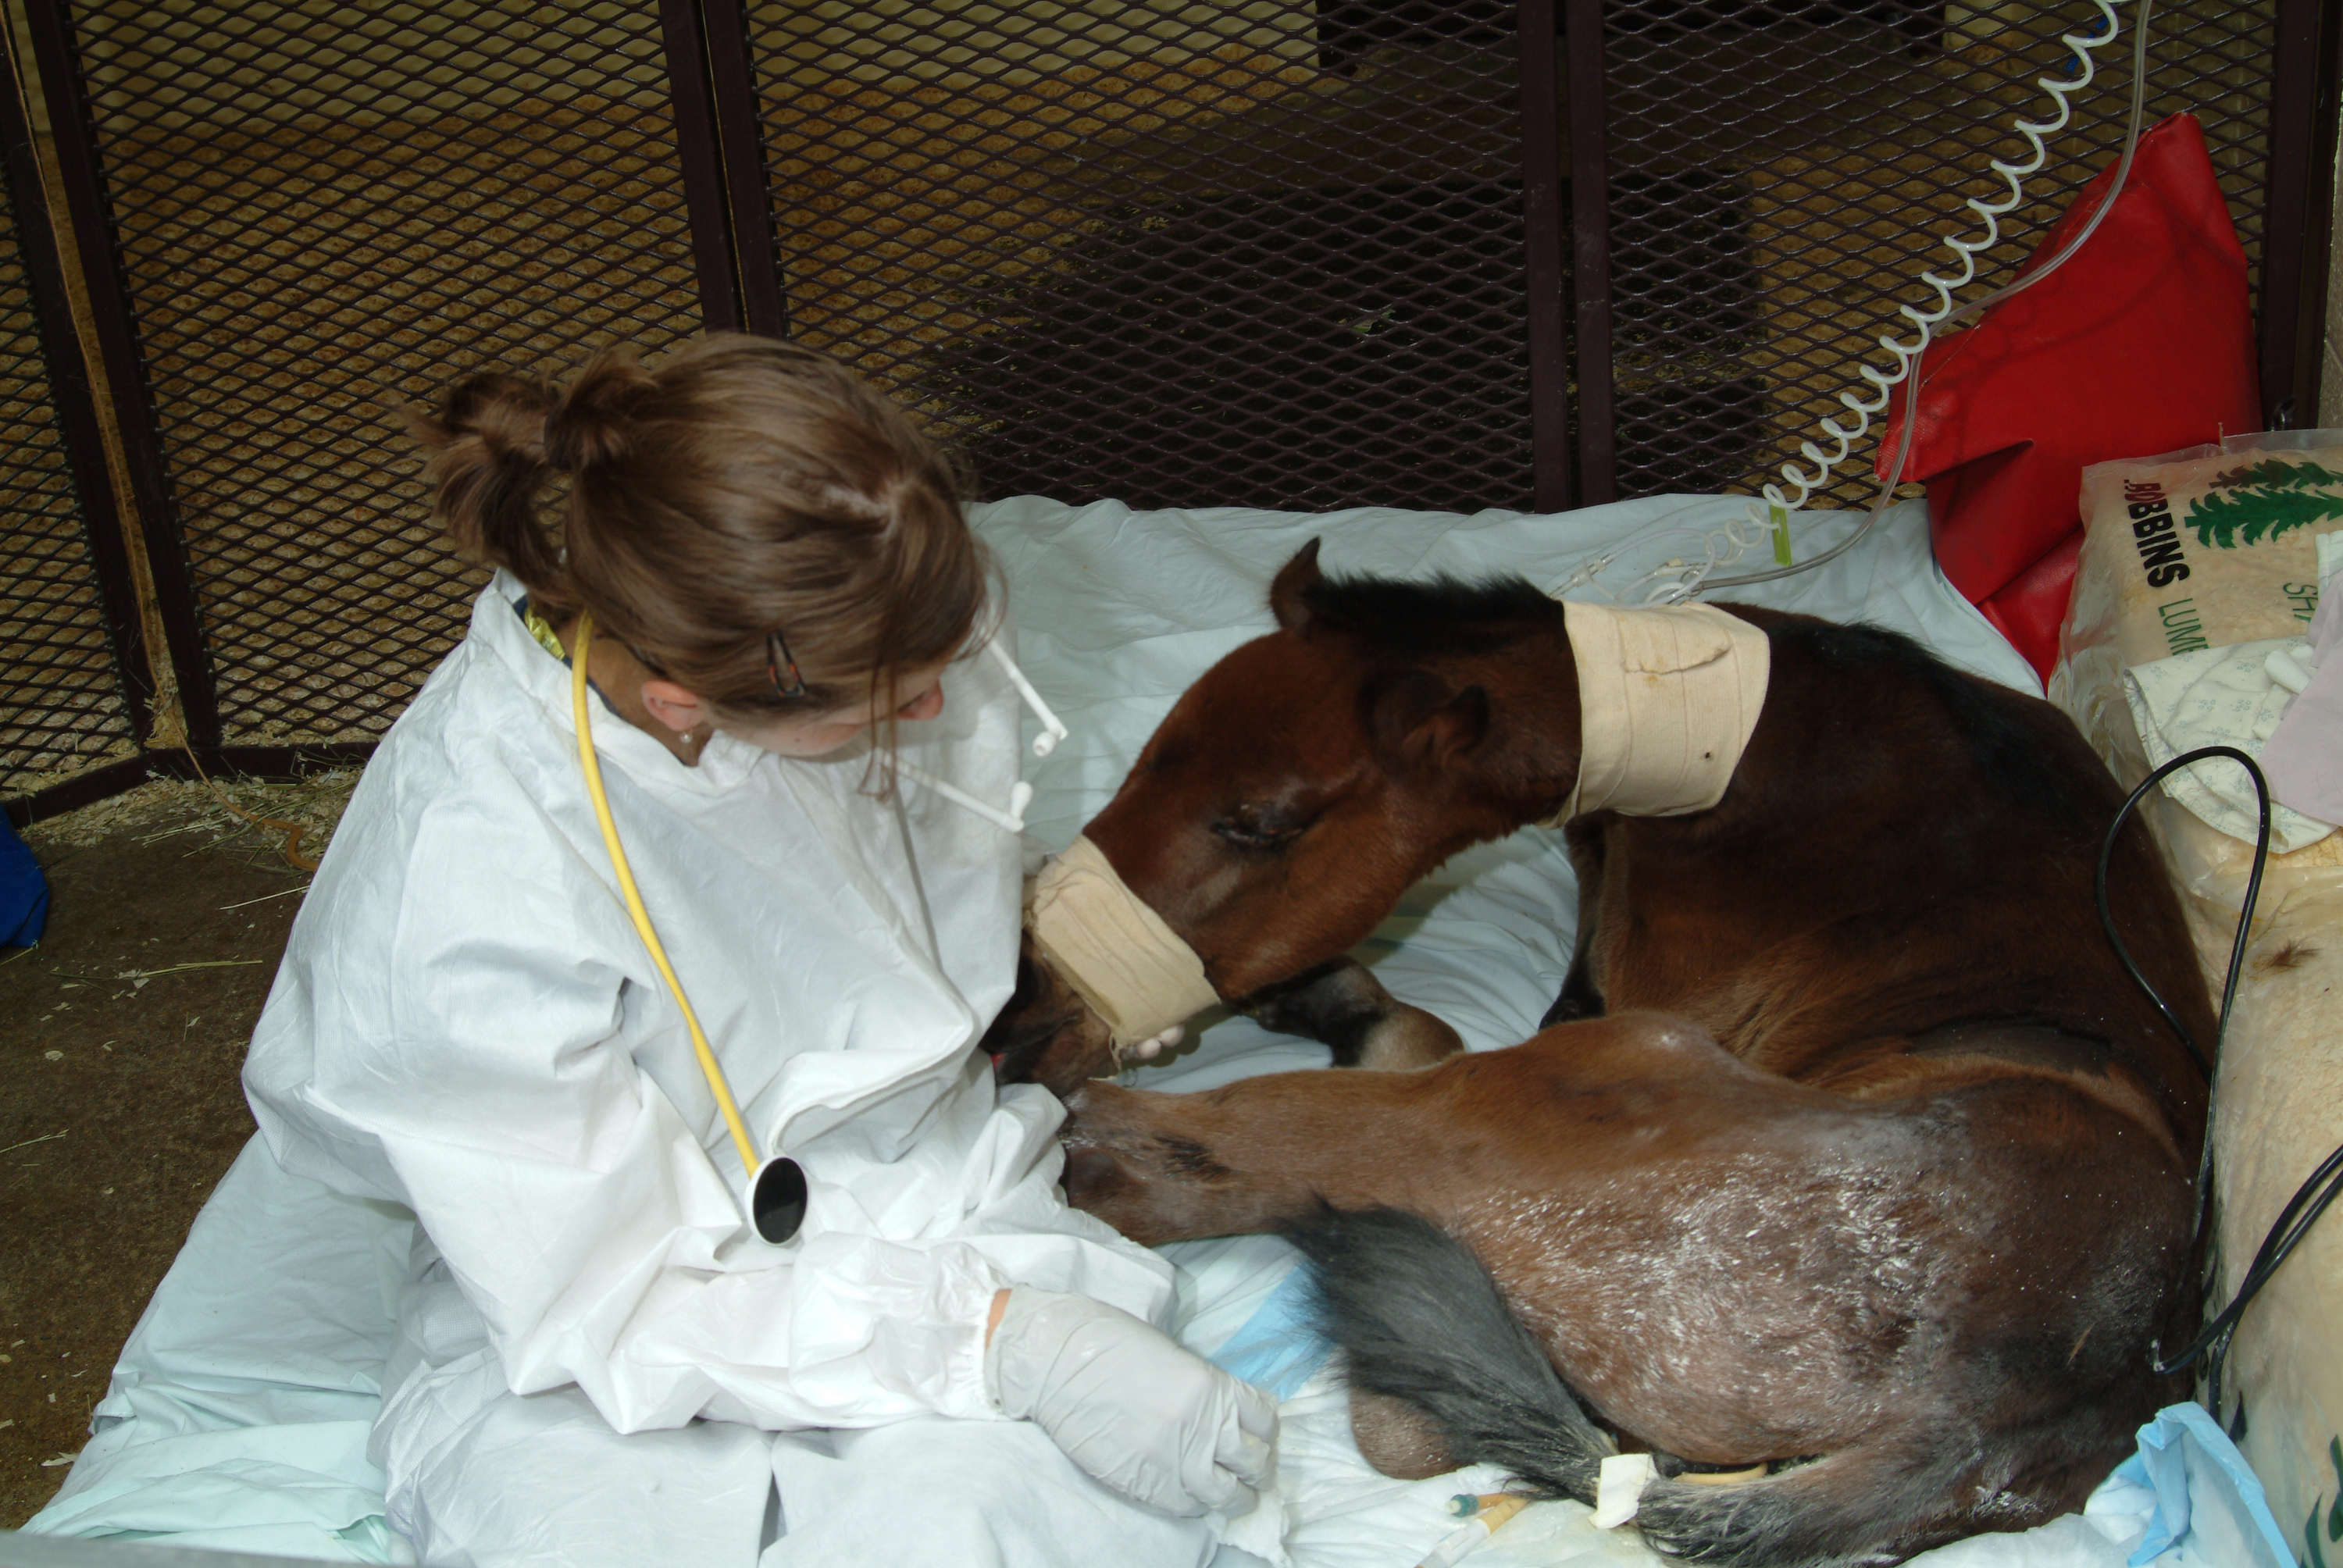 Equine medical center staff member with a foal